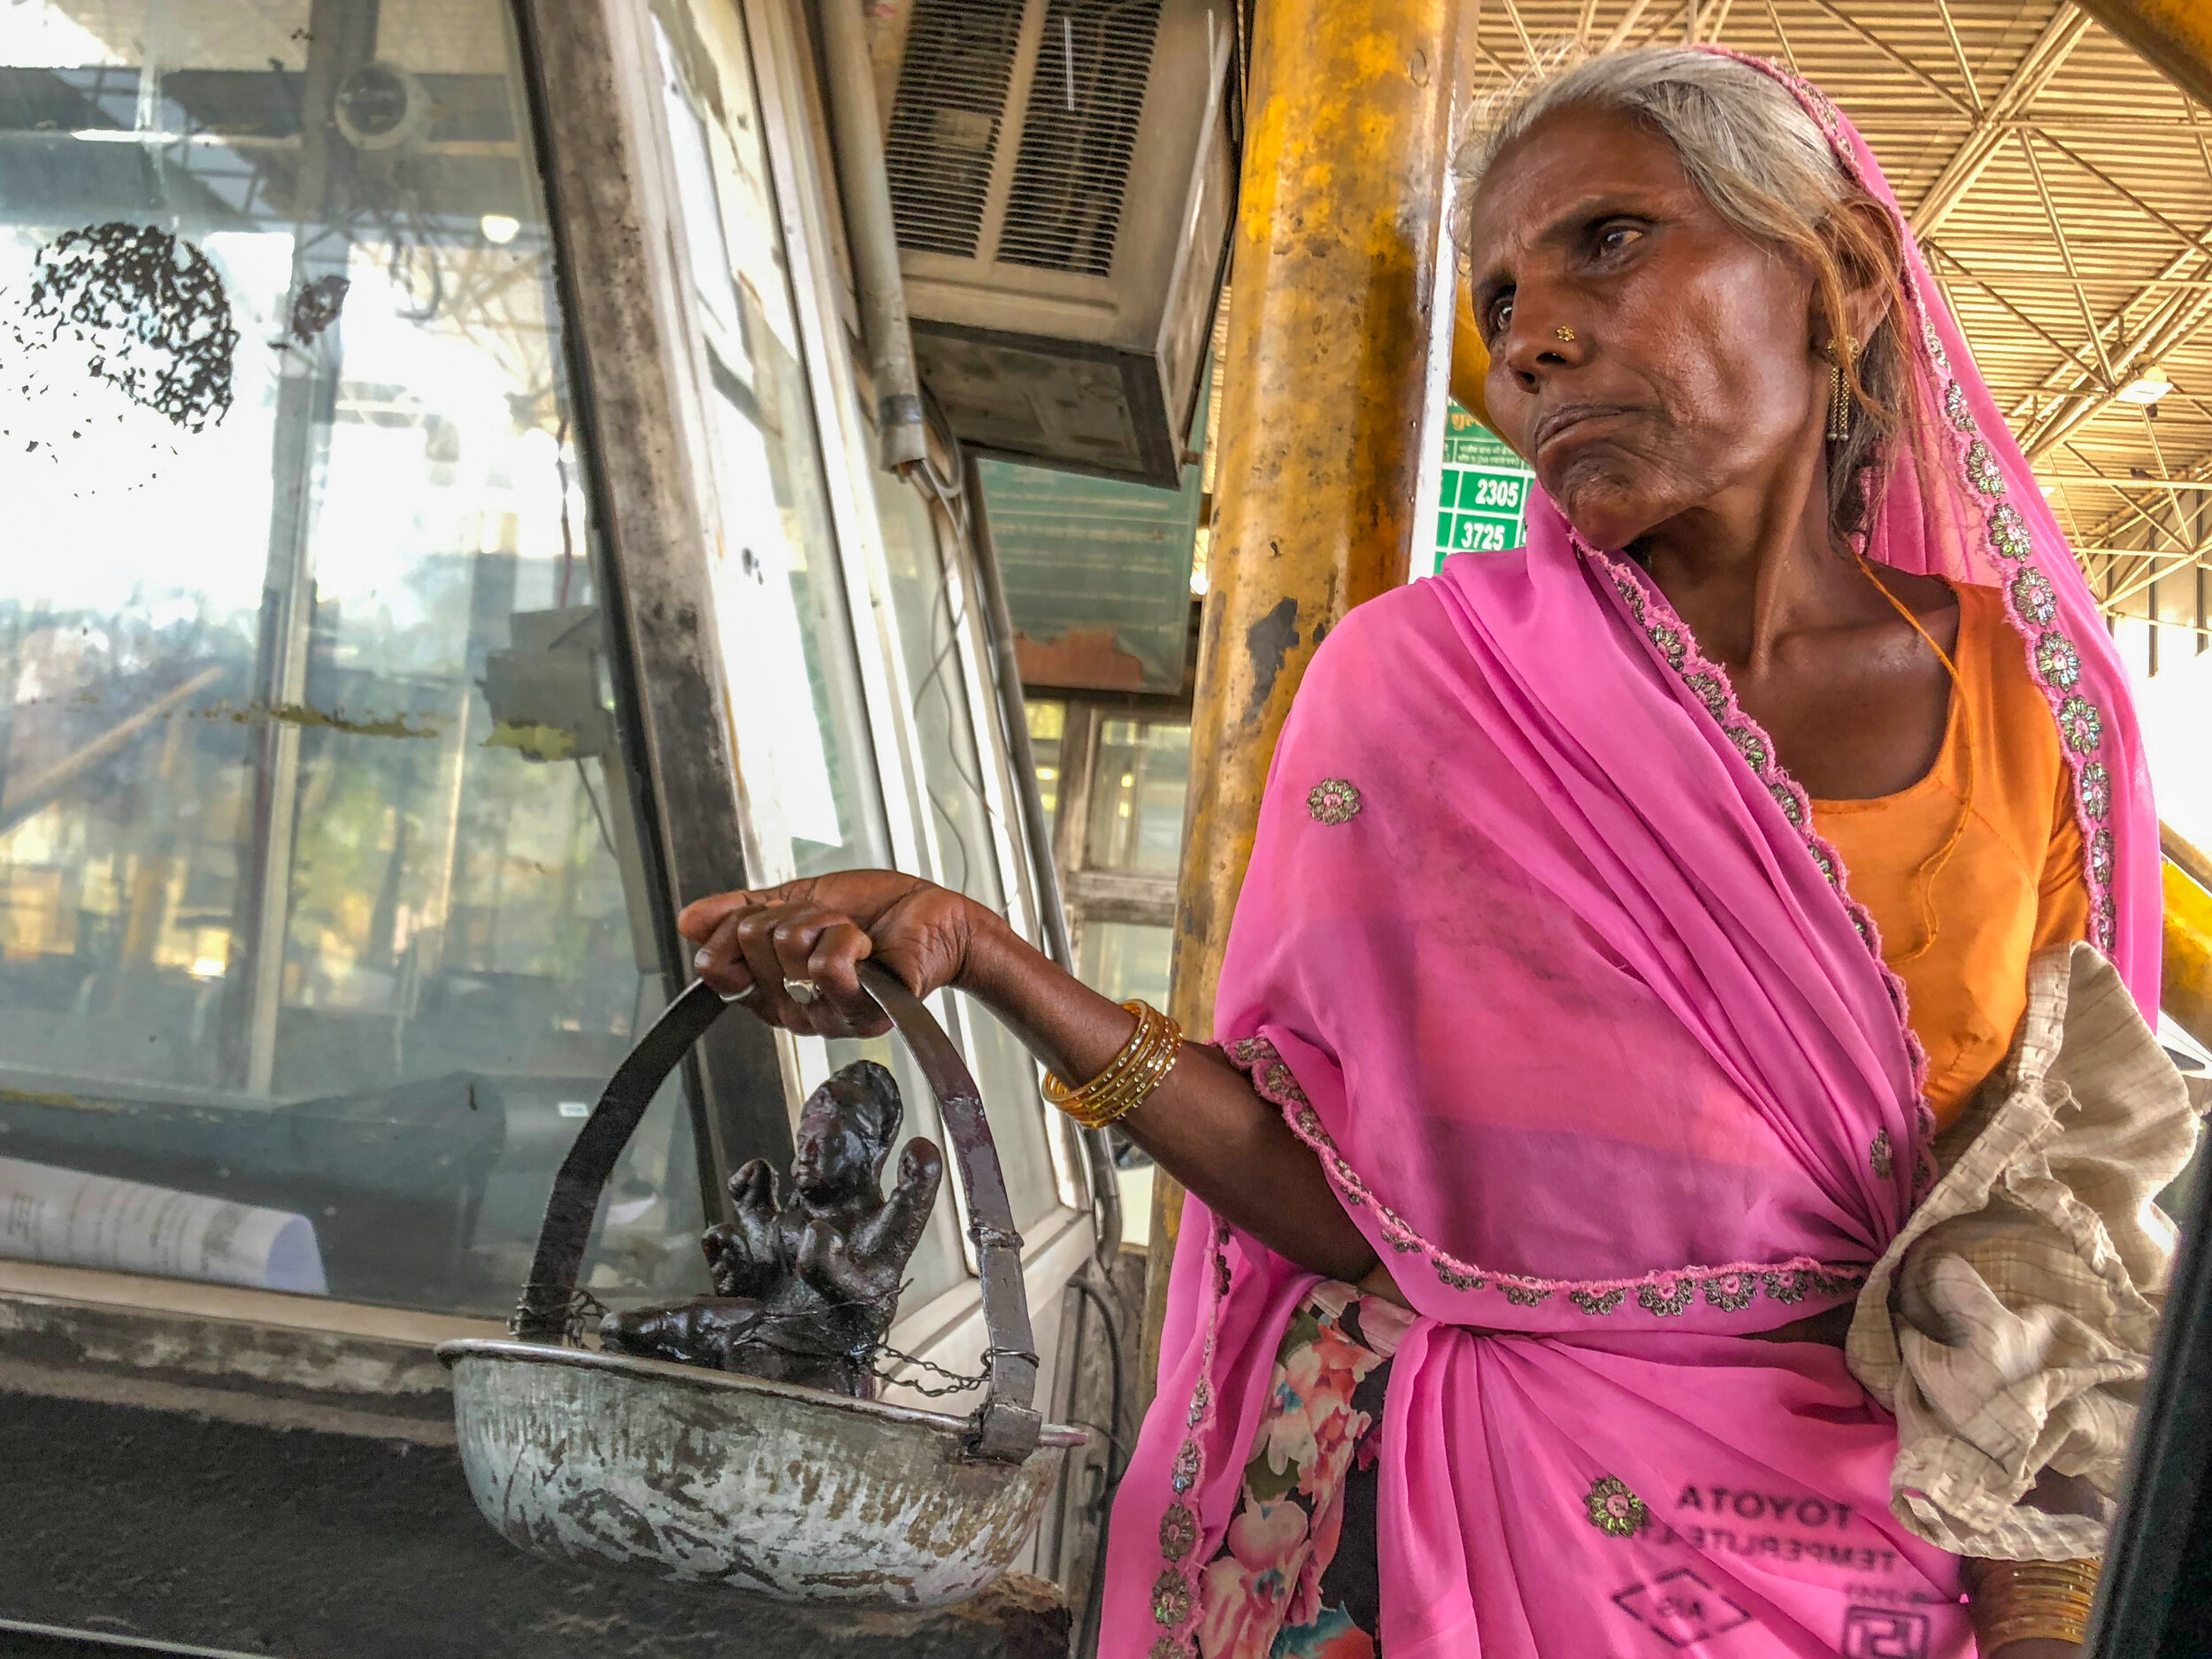 Woman at Toll Booth | Rajasthan, India |  Award winner Cosmos Club 2020 Cell Phone Contest